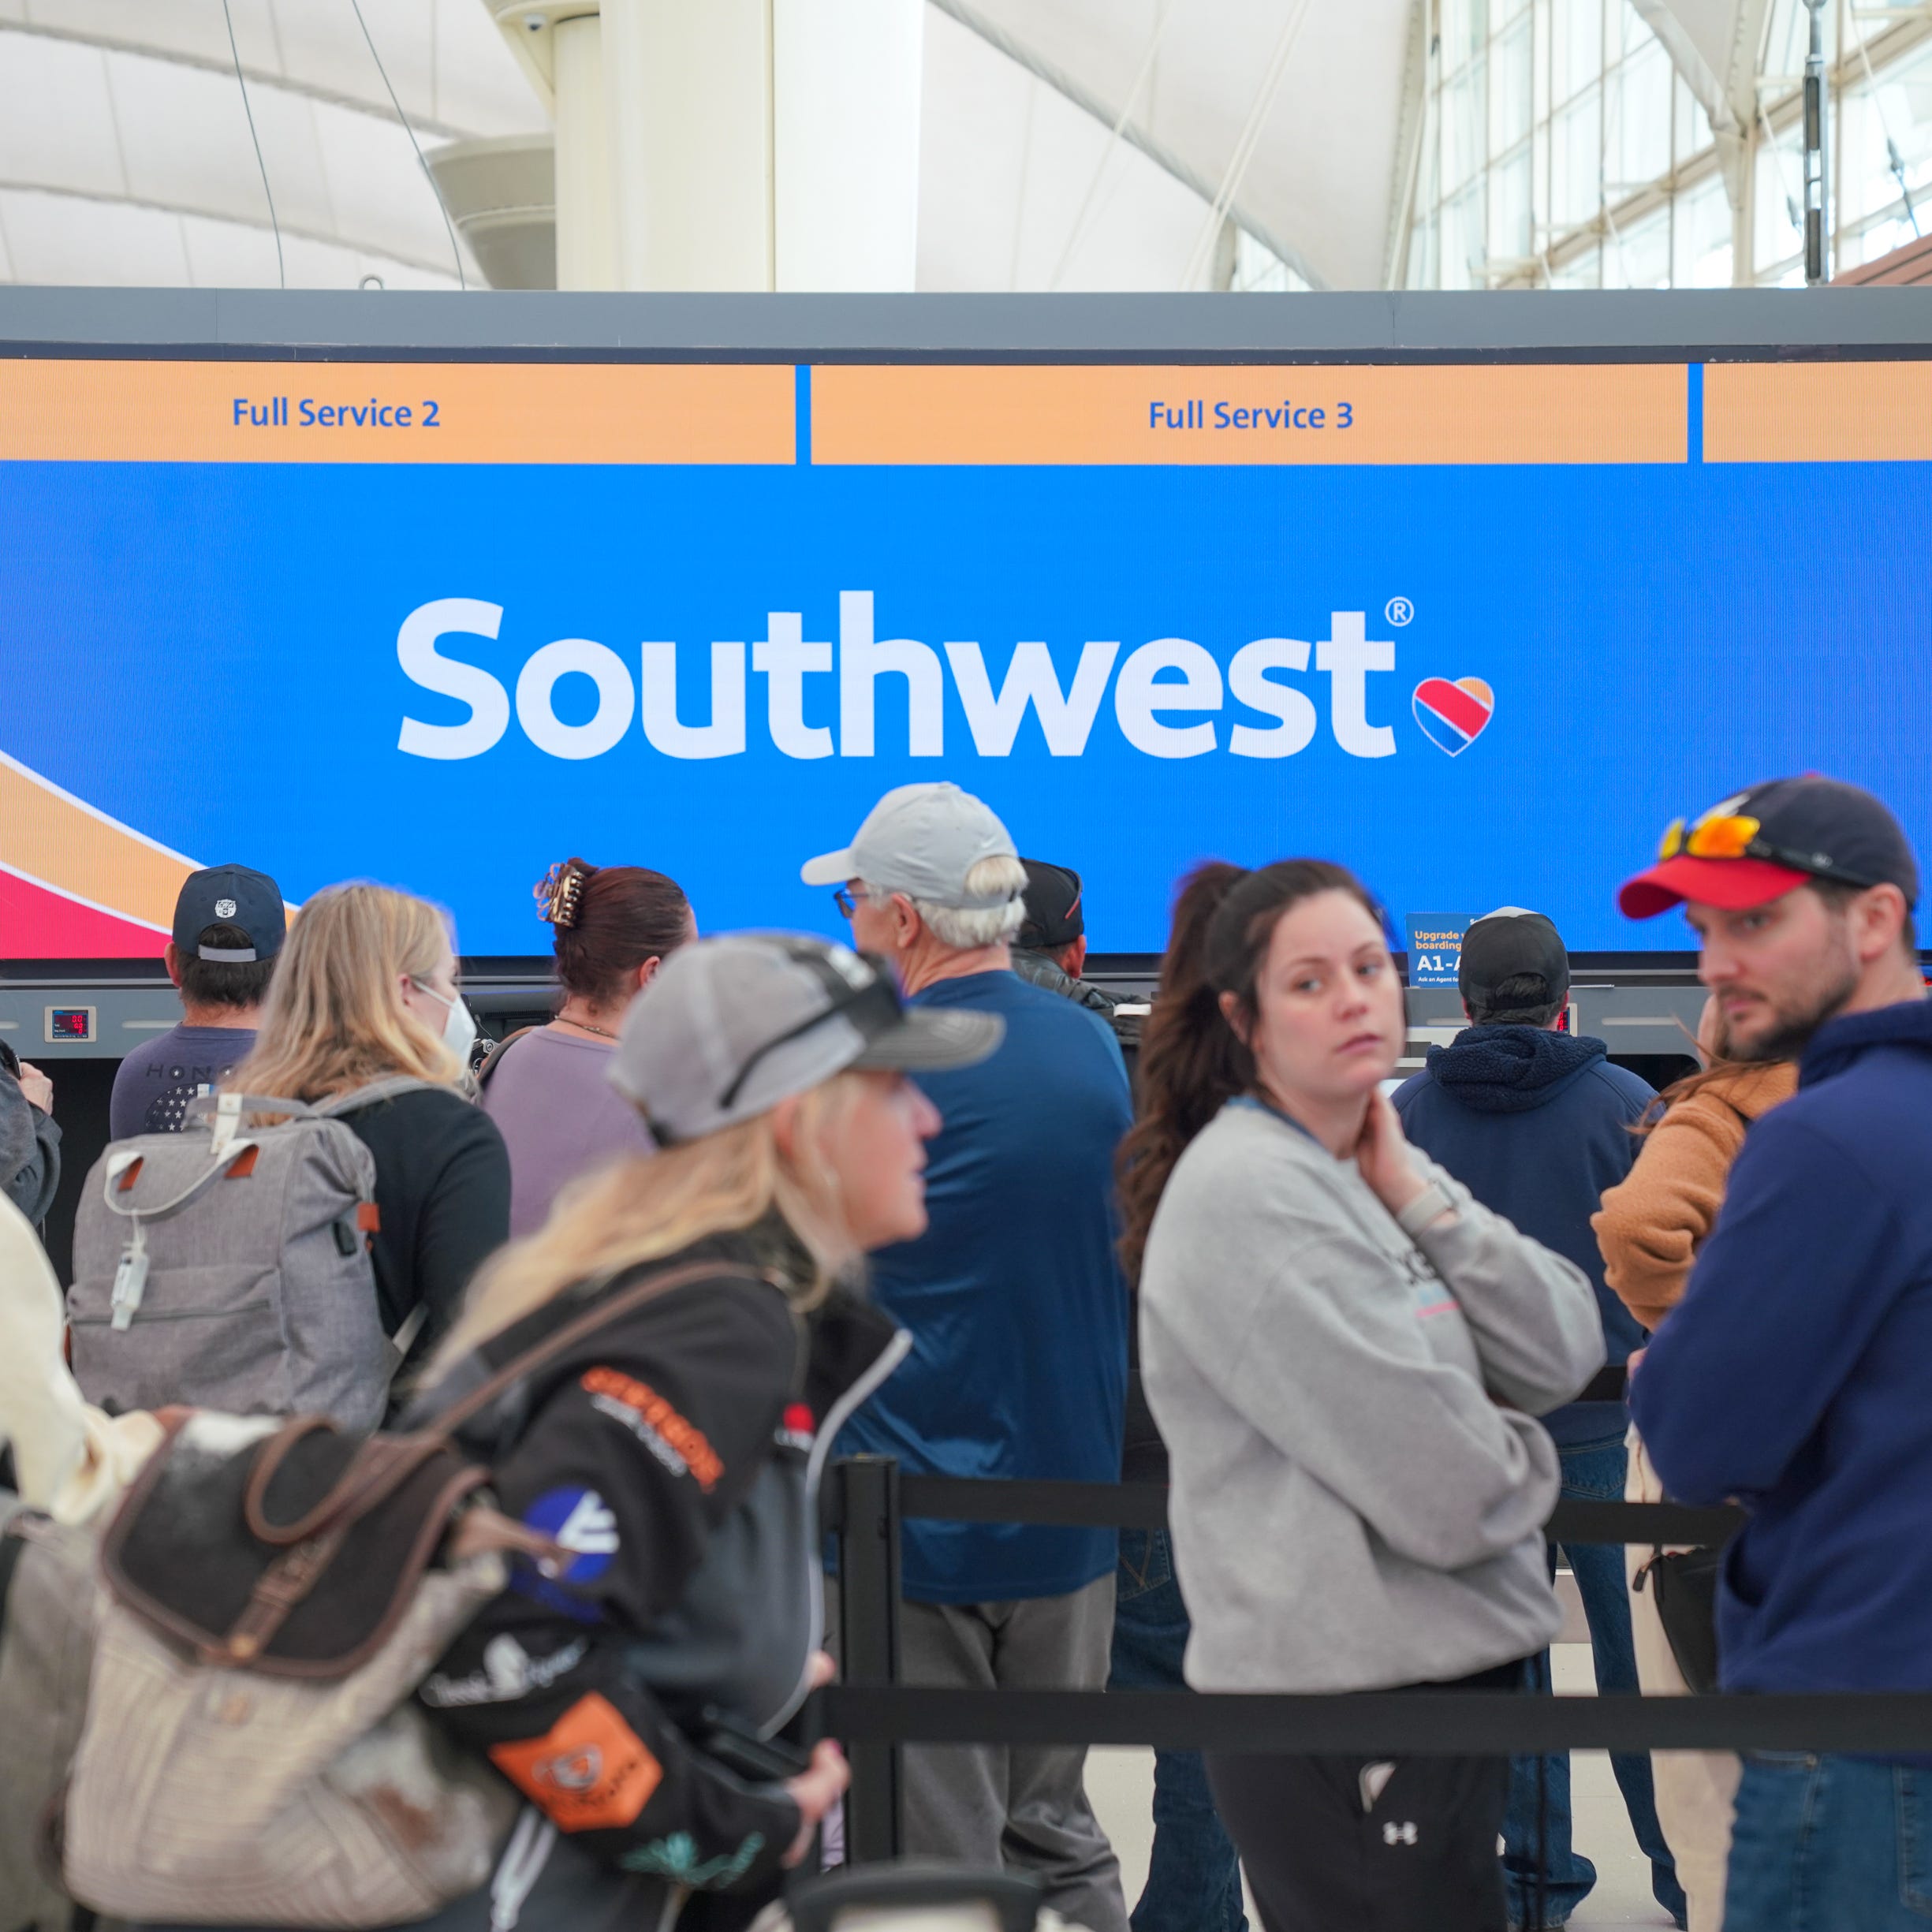 People wait in line for customer assistance from Southwest at Denver International Airport on Tuesday, Dec. 27, 2022.